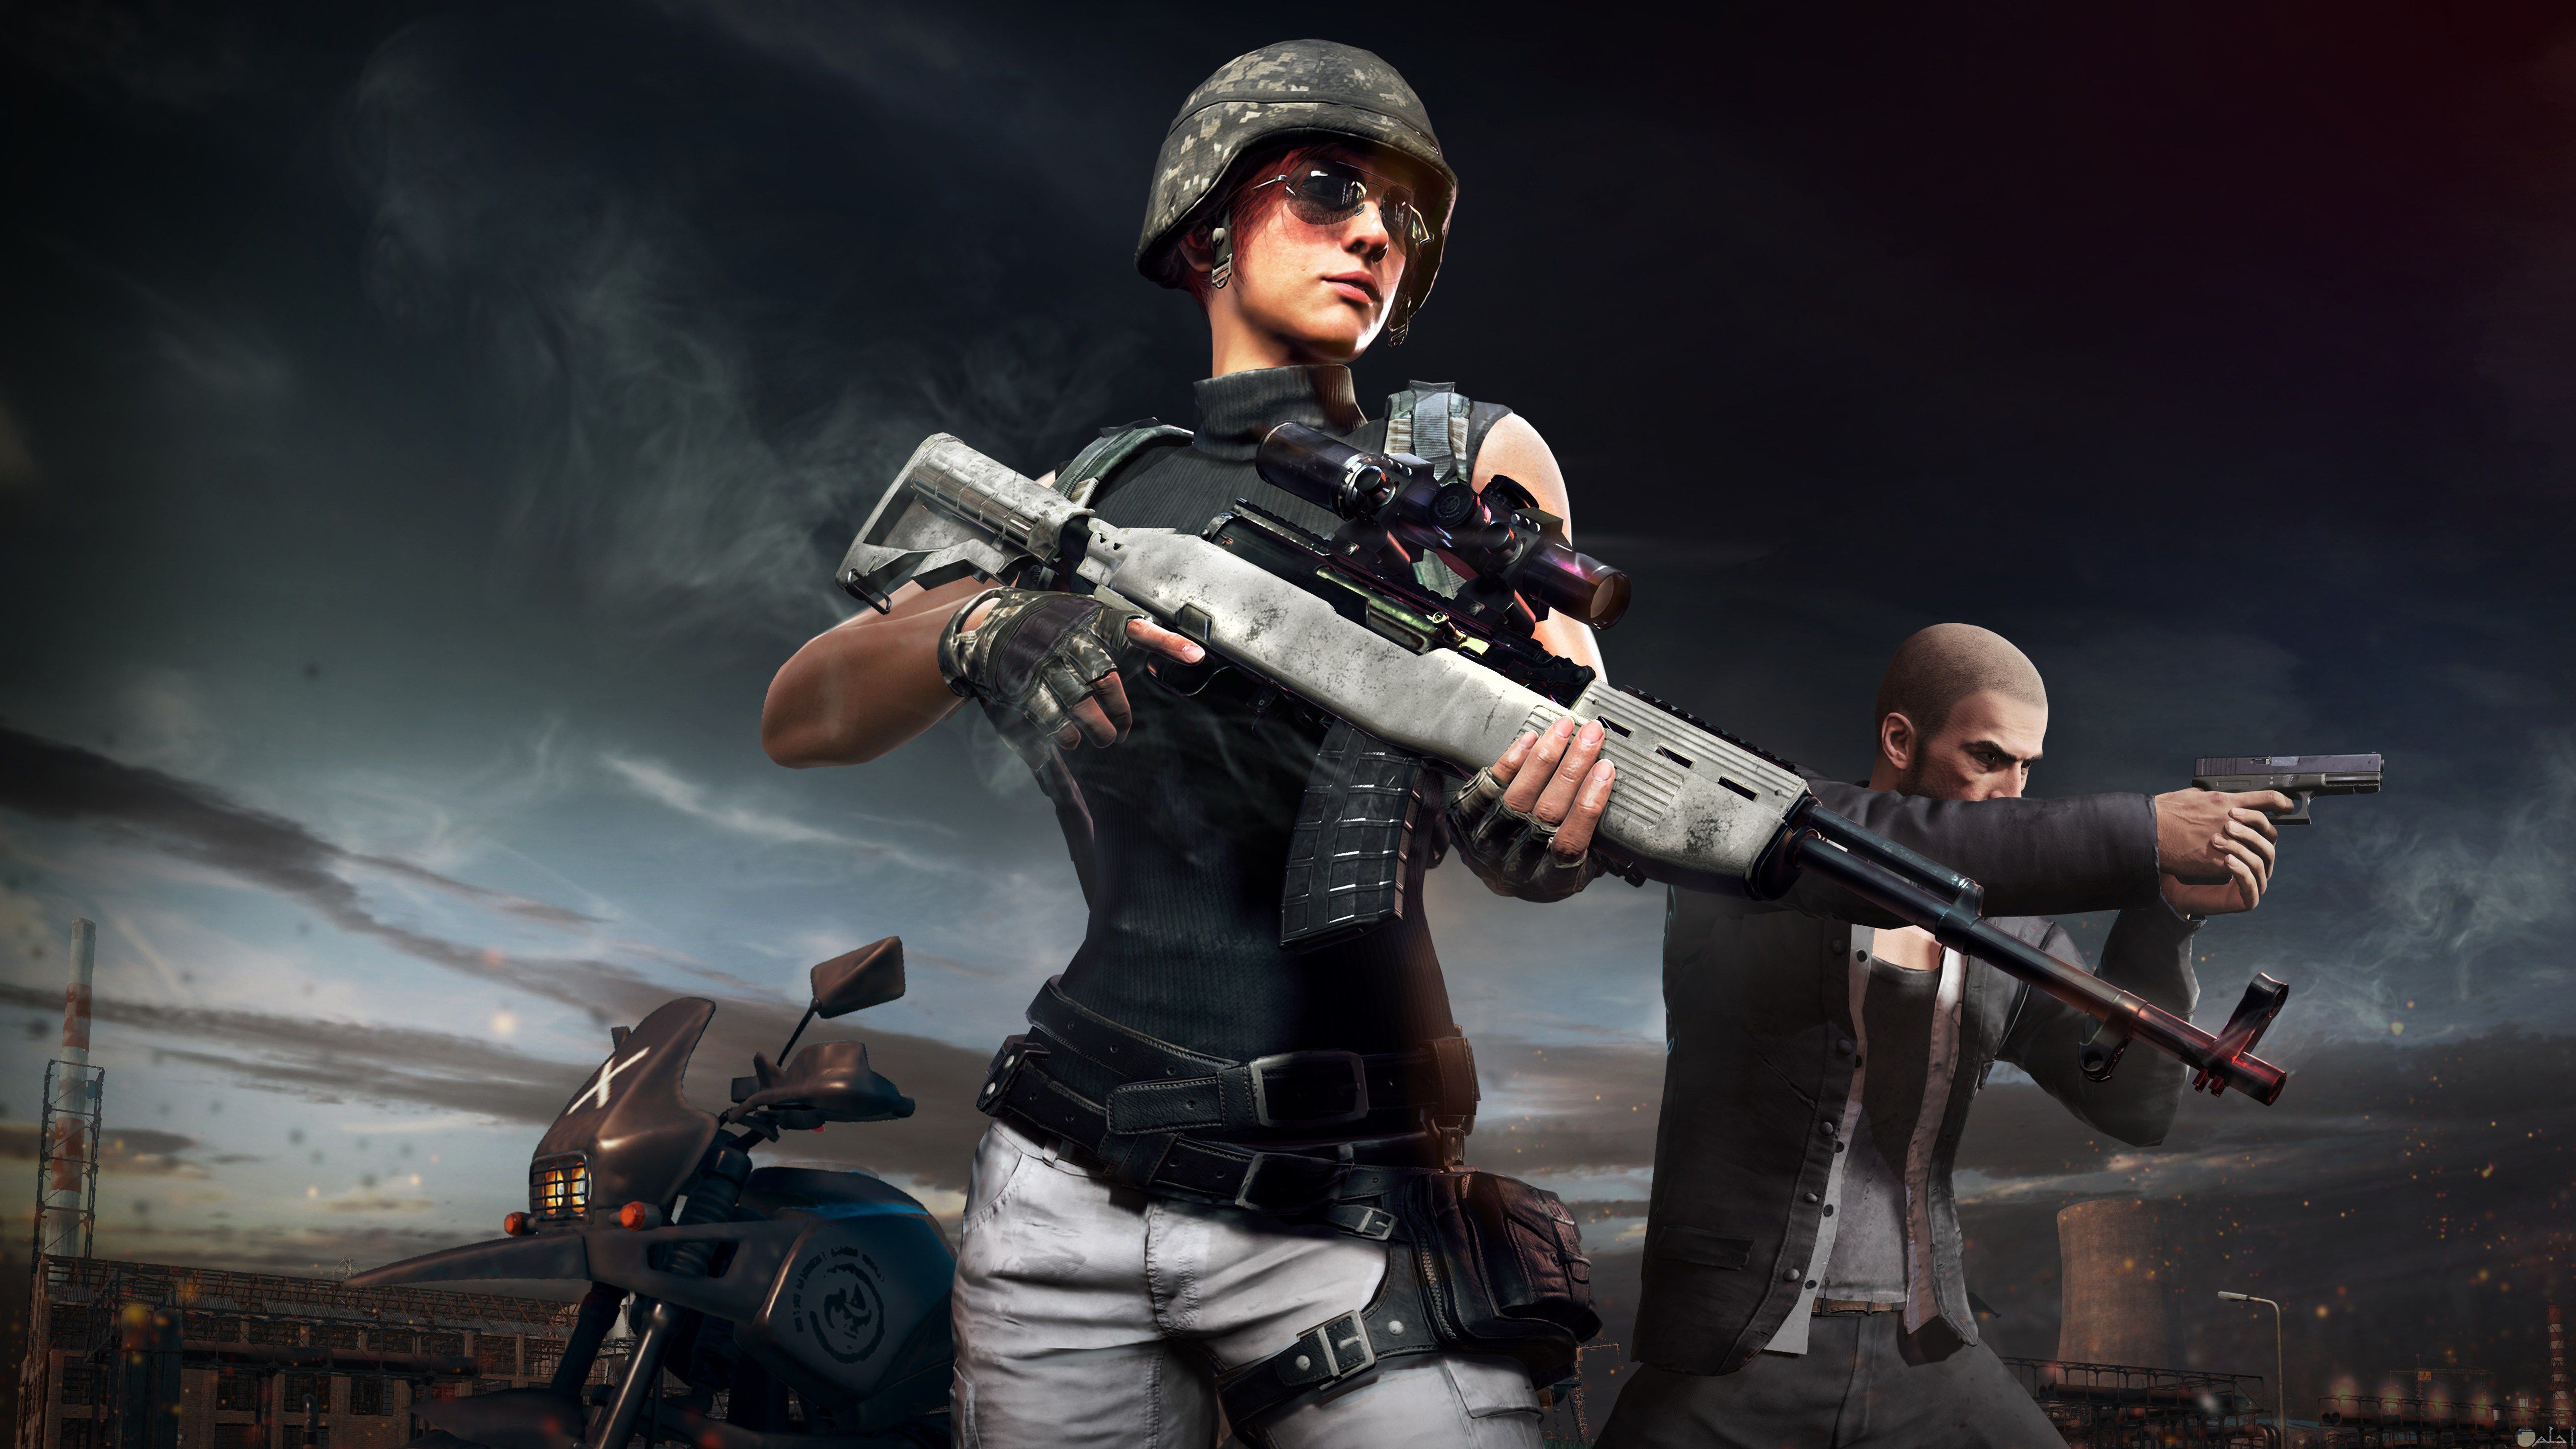 5K_Wallpaper_of_Girl_with_Weapon_Sniper_in_PUBG_Game.jpg